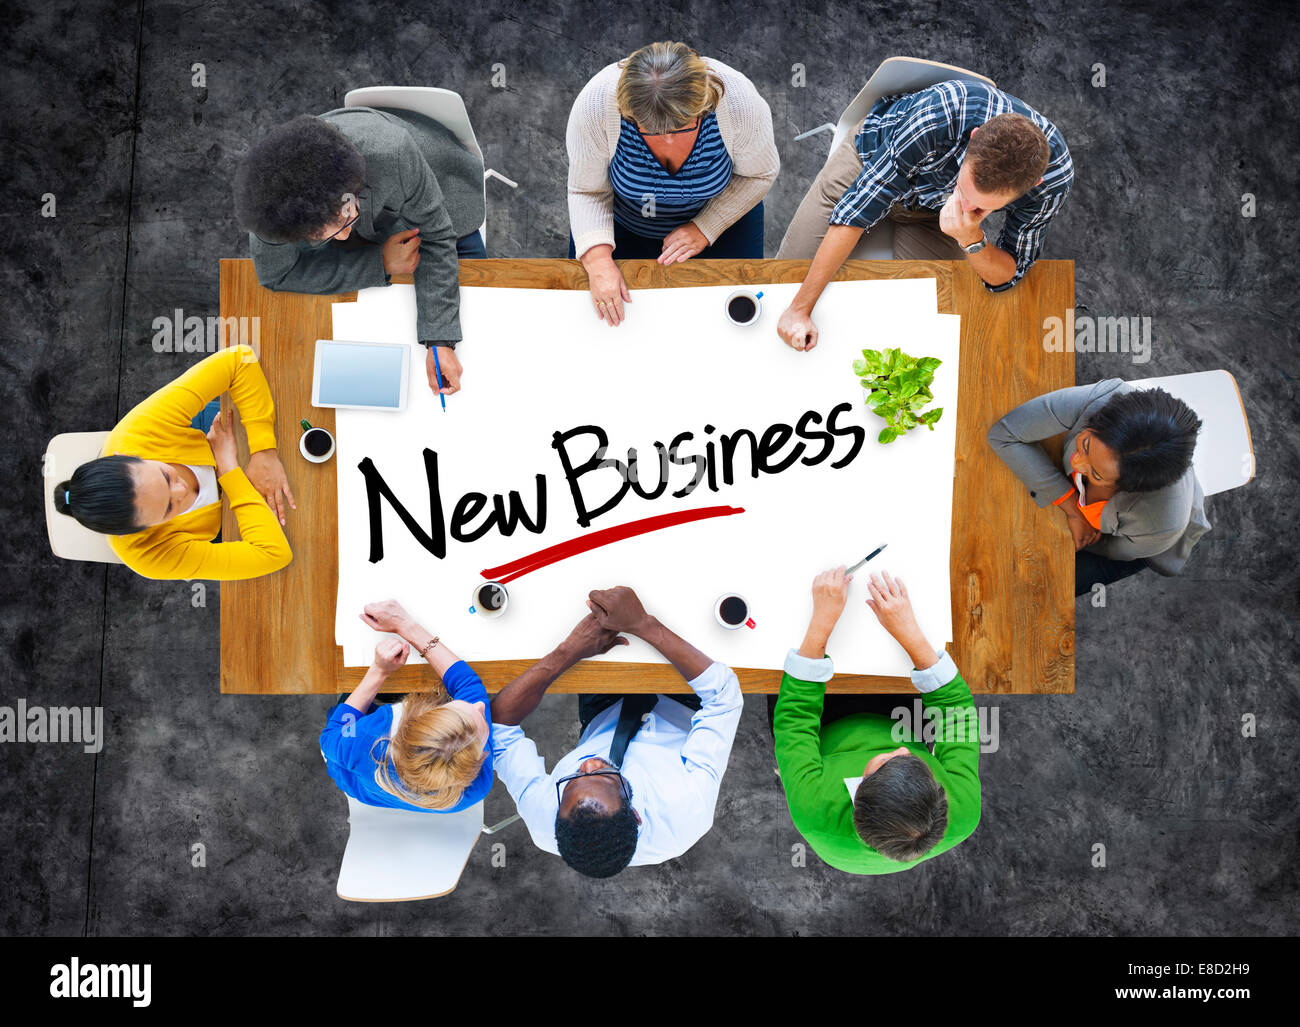 Group of People Brainstorming about New Business Concept Stock Photo